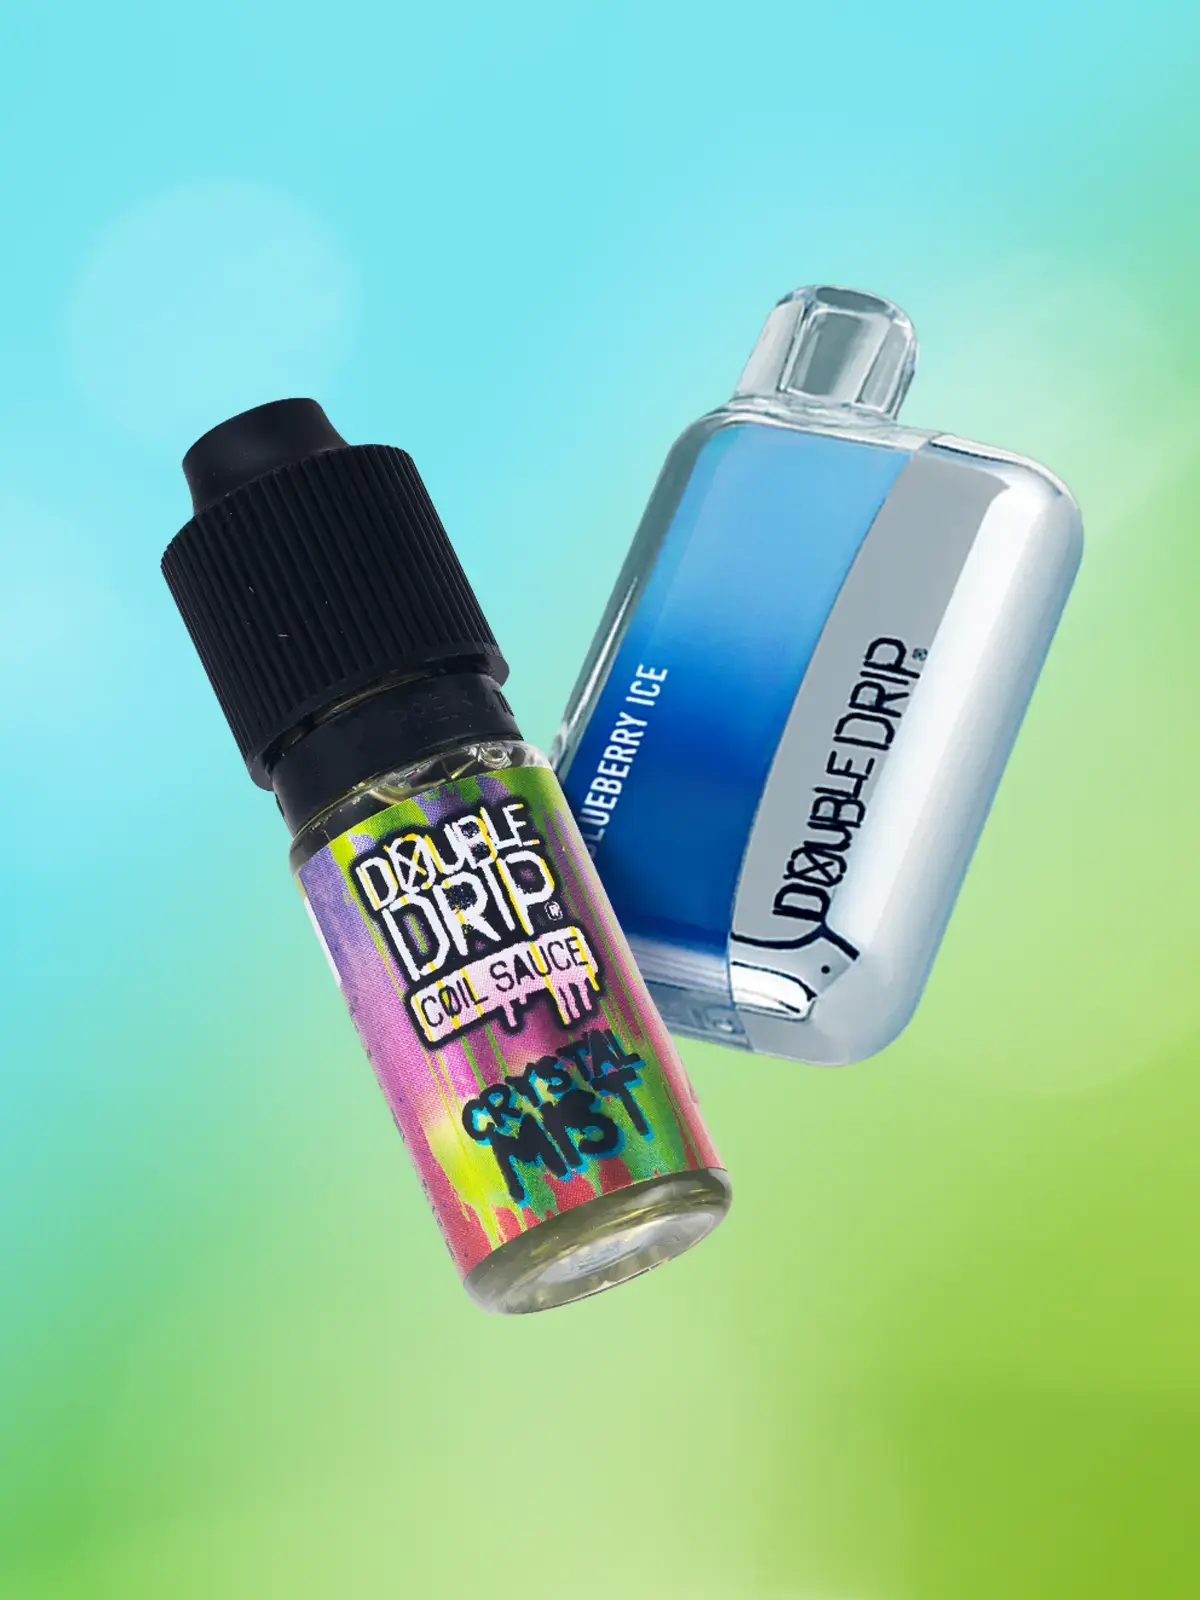 A Double Drop e-liquid in Crystal Mist flavour and a Blueberry Ice disposable, floating in front of a blue and green background